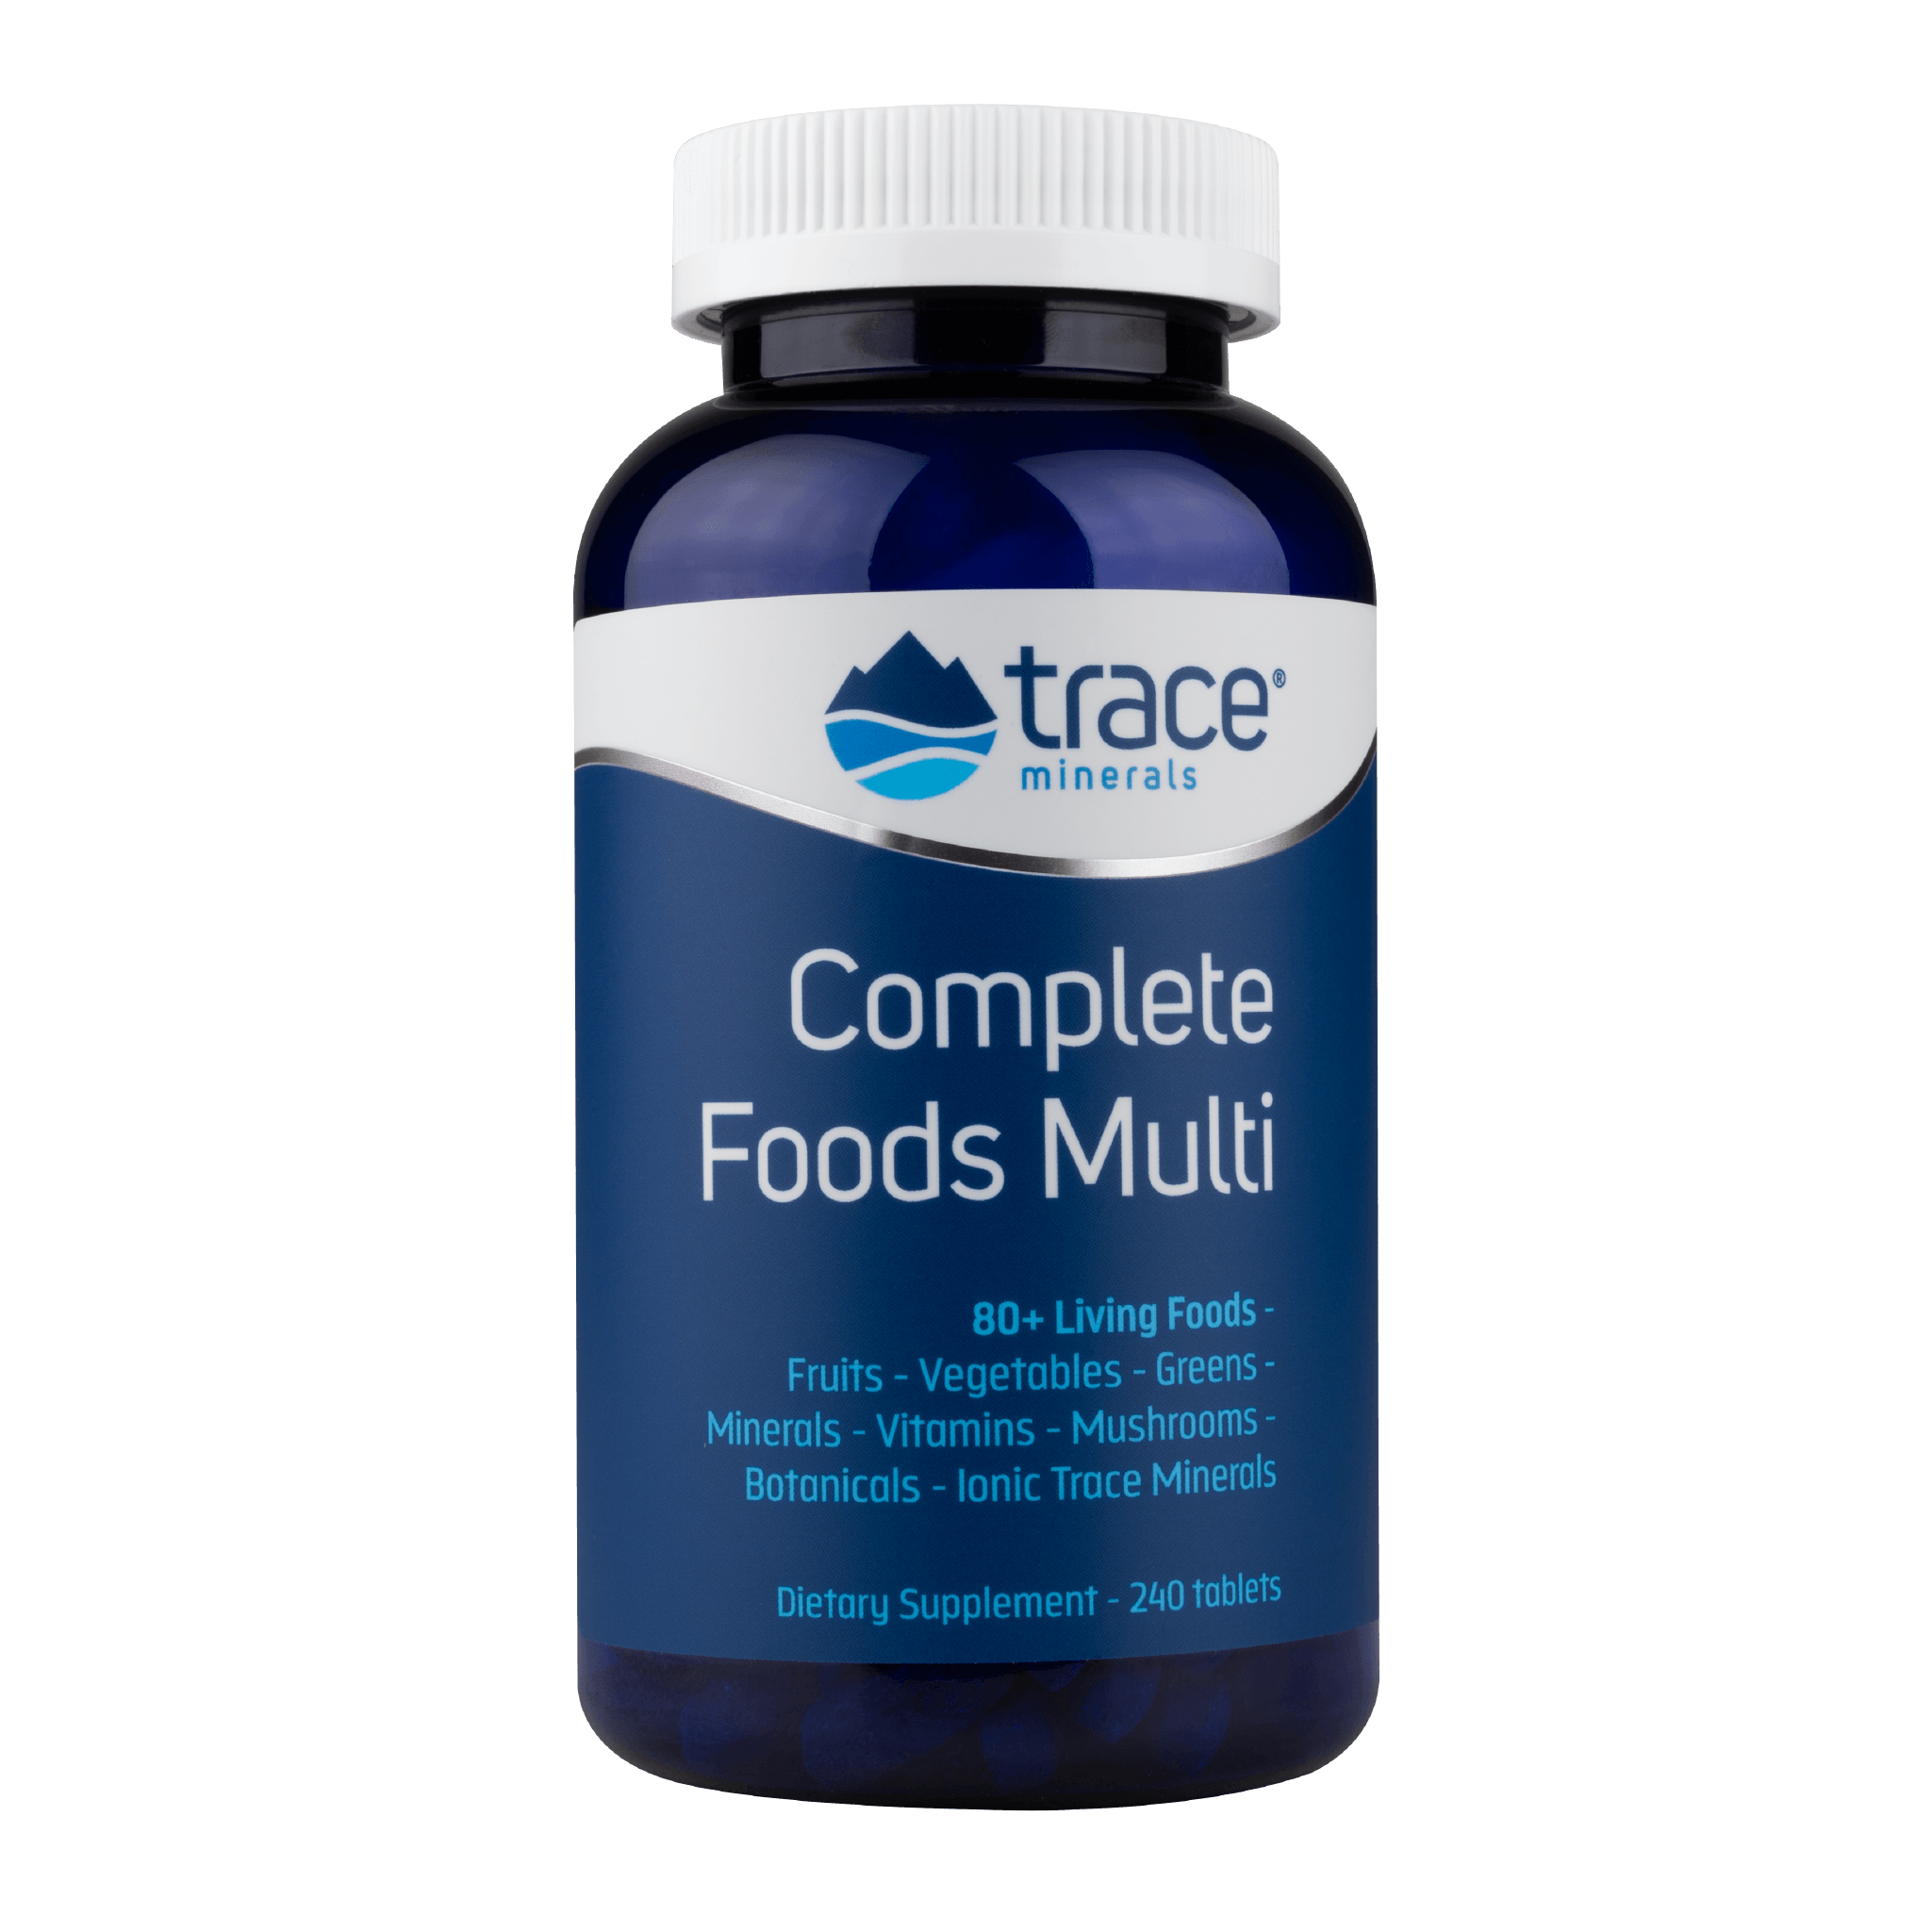 Complete Foods Multi - Trace Minerals